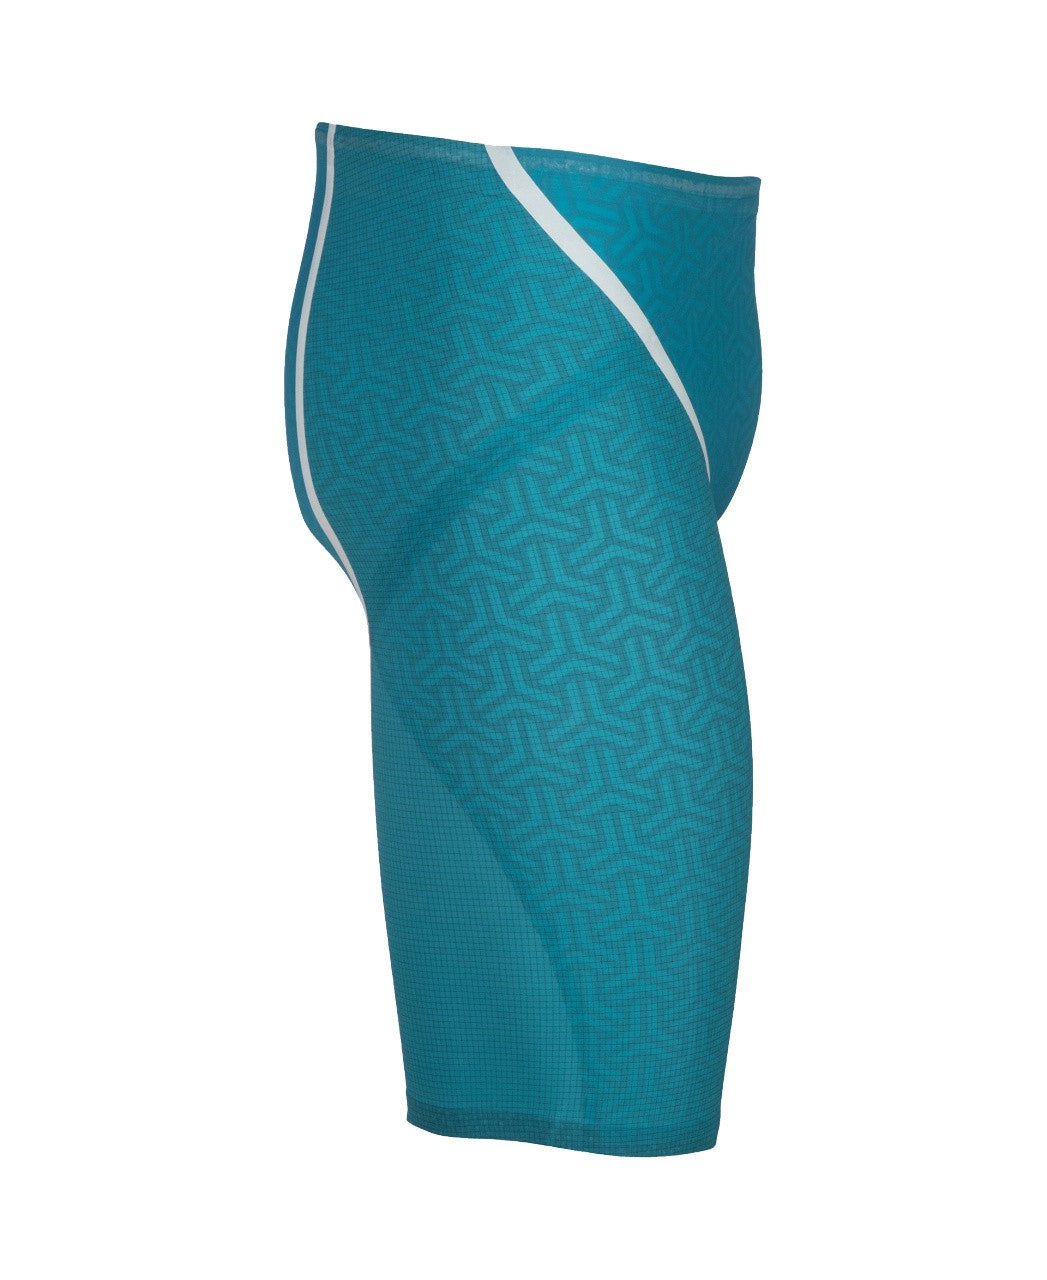 M Powerskin Carbon Glide LE Jammer calypso bay